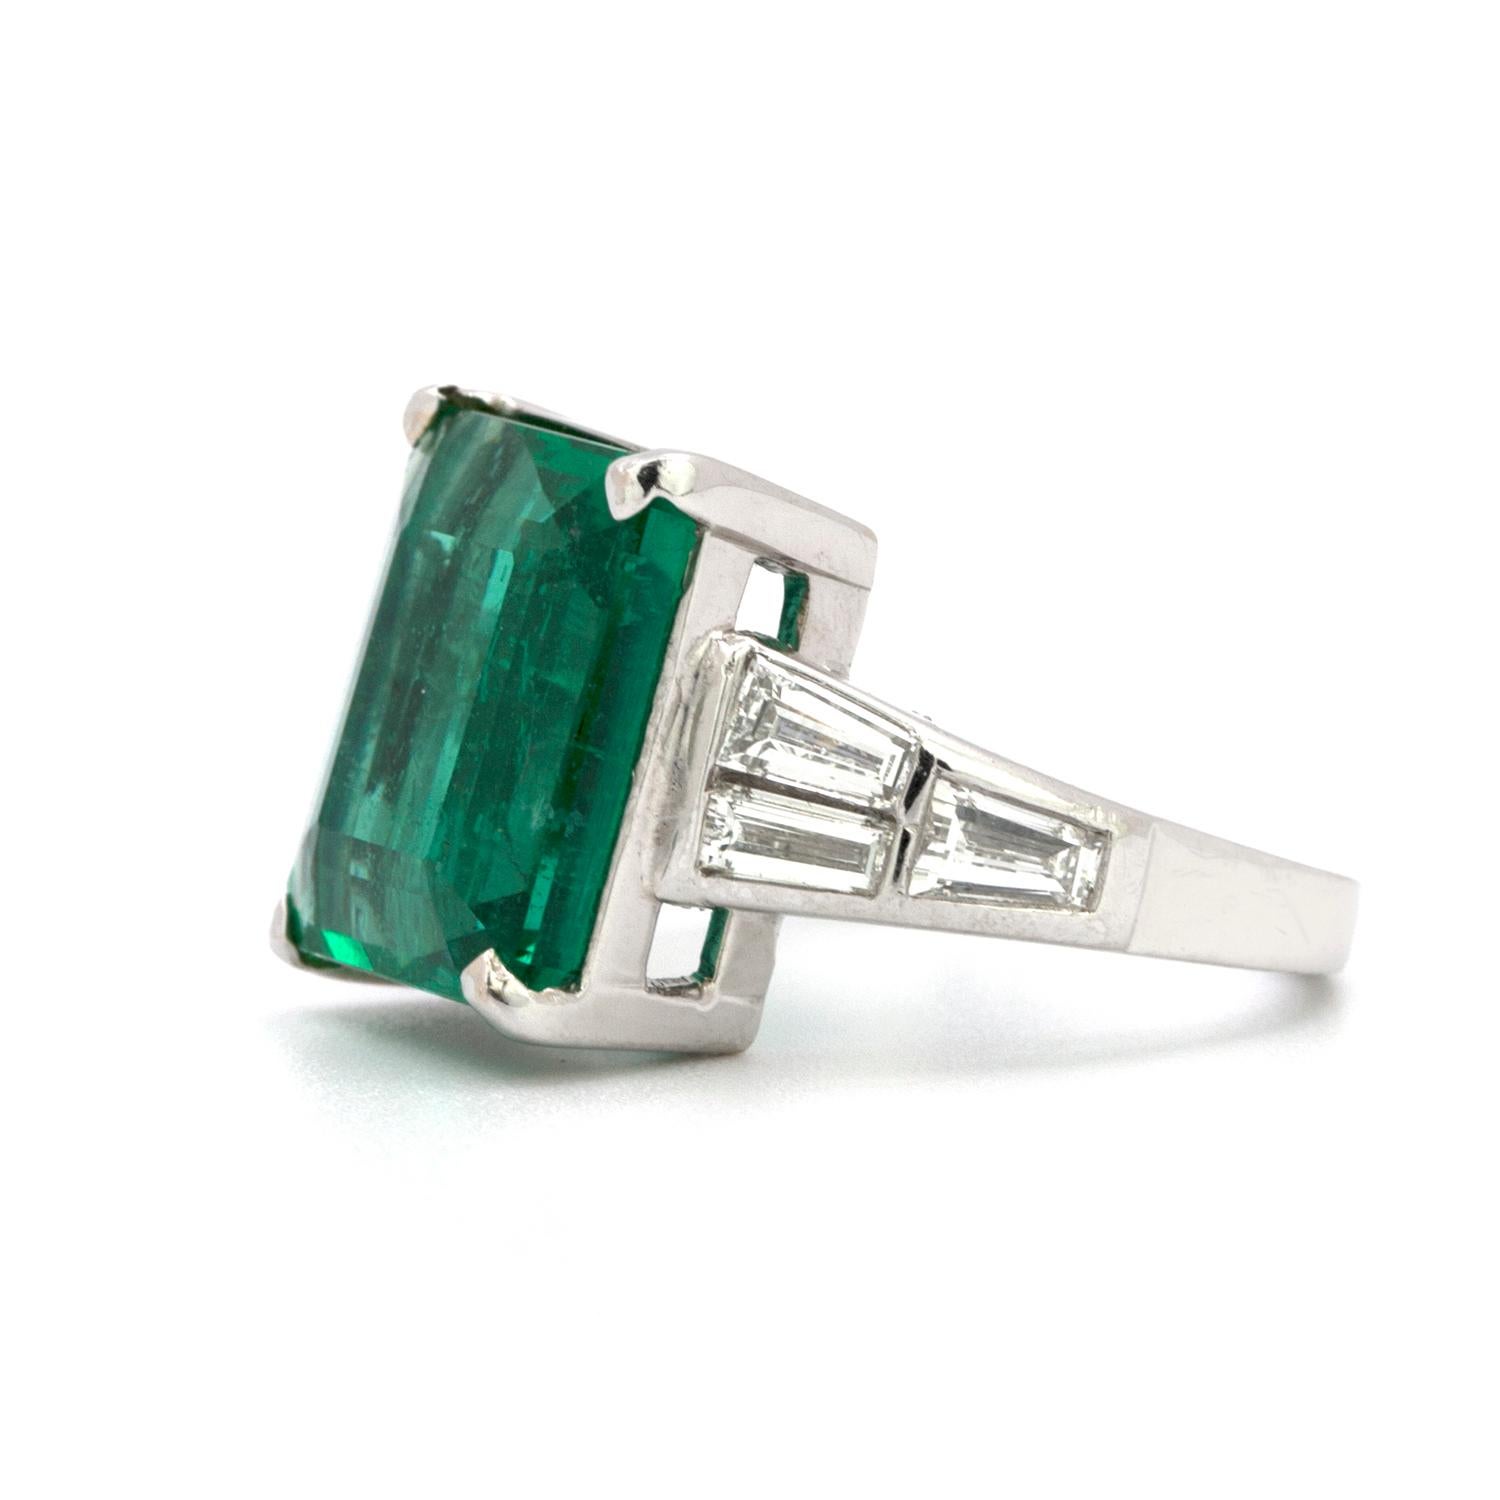 A beautifully crafted platinum ring that features a 10.23 carat Colombian colored natural emerald is set with 6 clean white tapered baguette diamonds that weigh in total 1.50 carats.    Size 6 1/4
 
